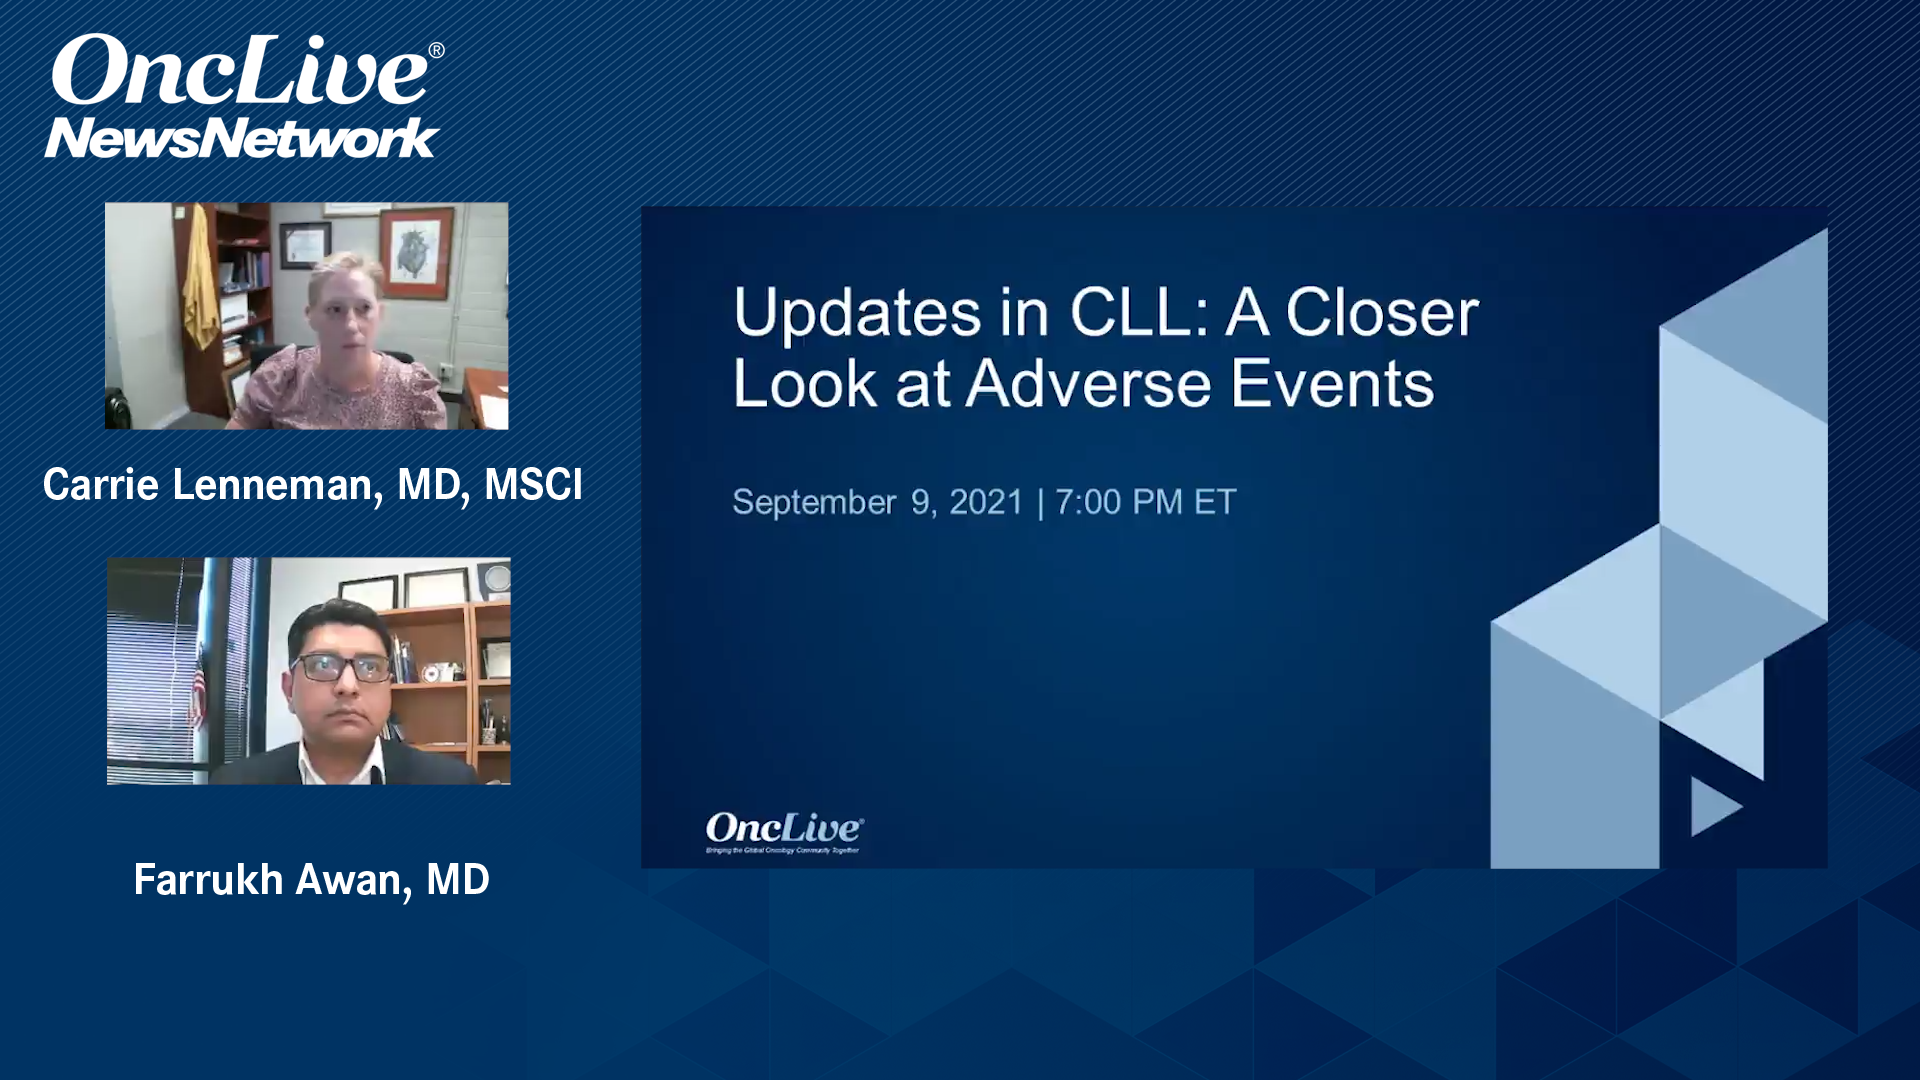 A Review of Treatment Options in CLL